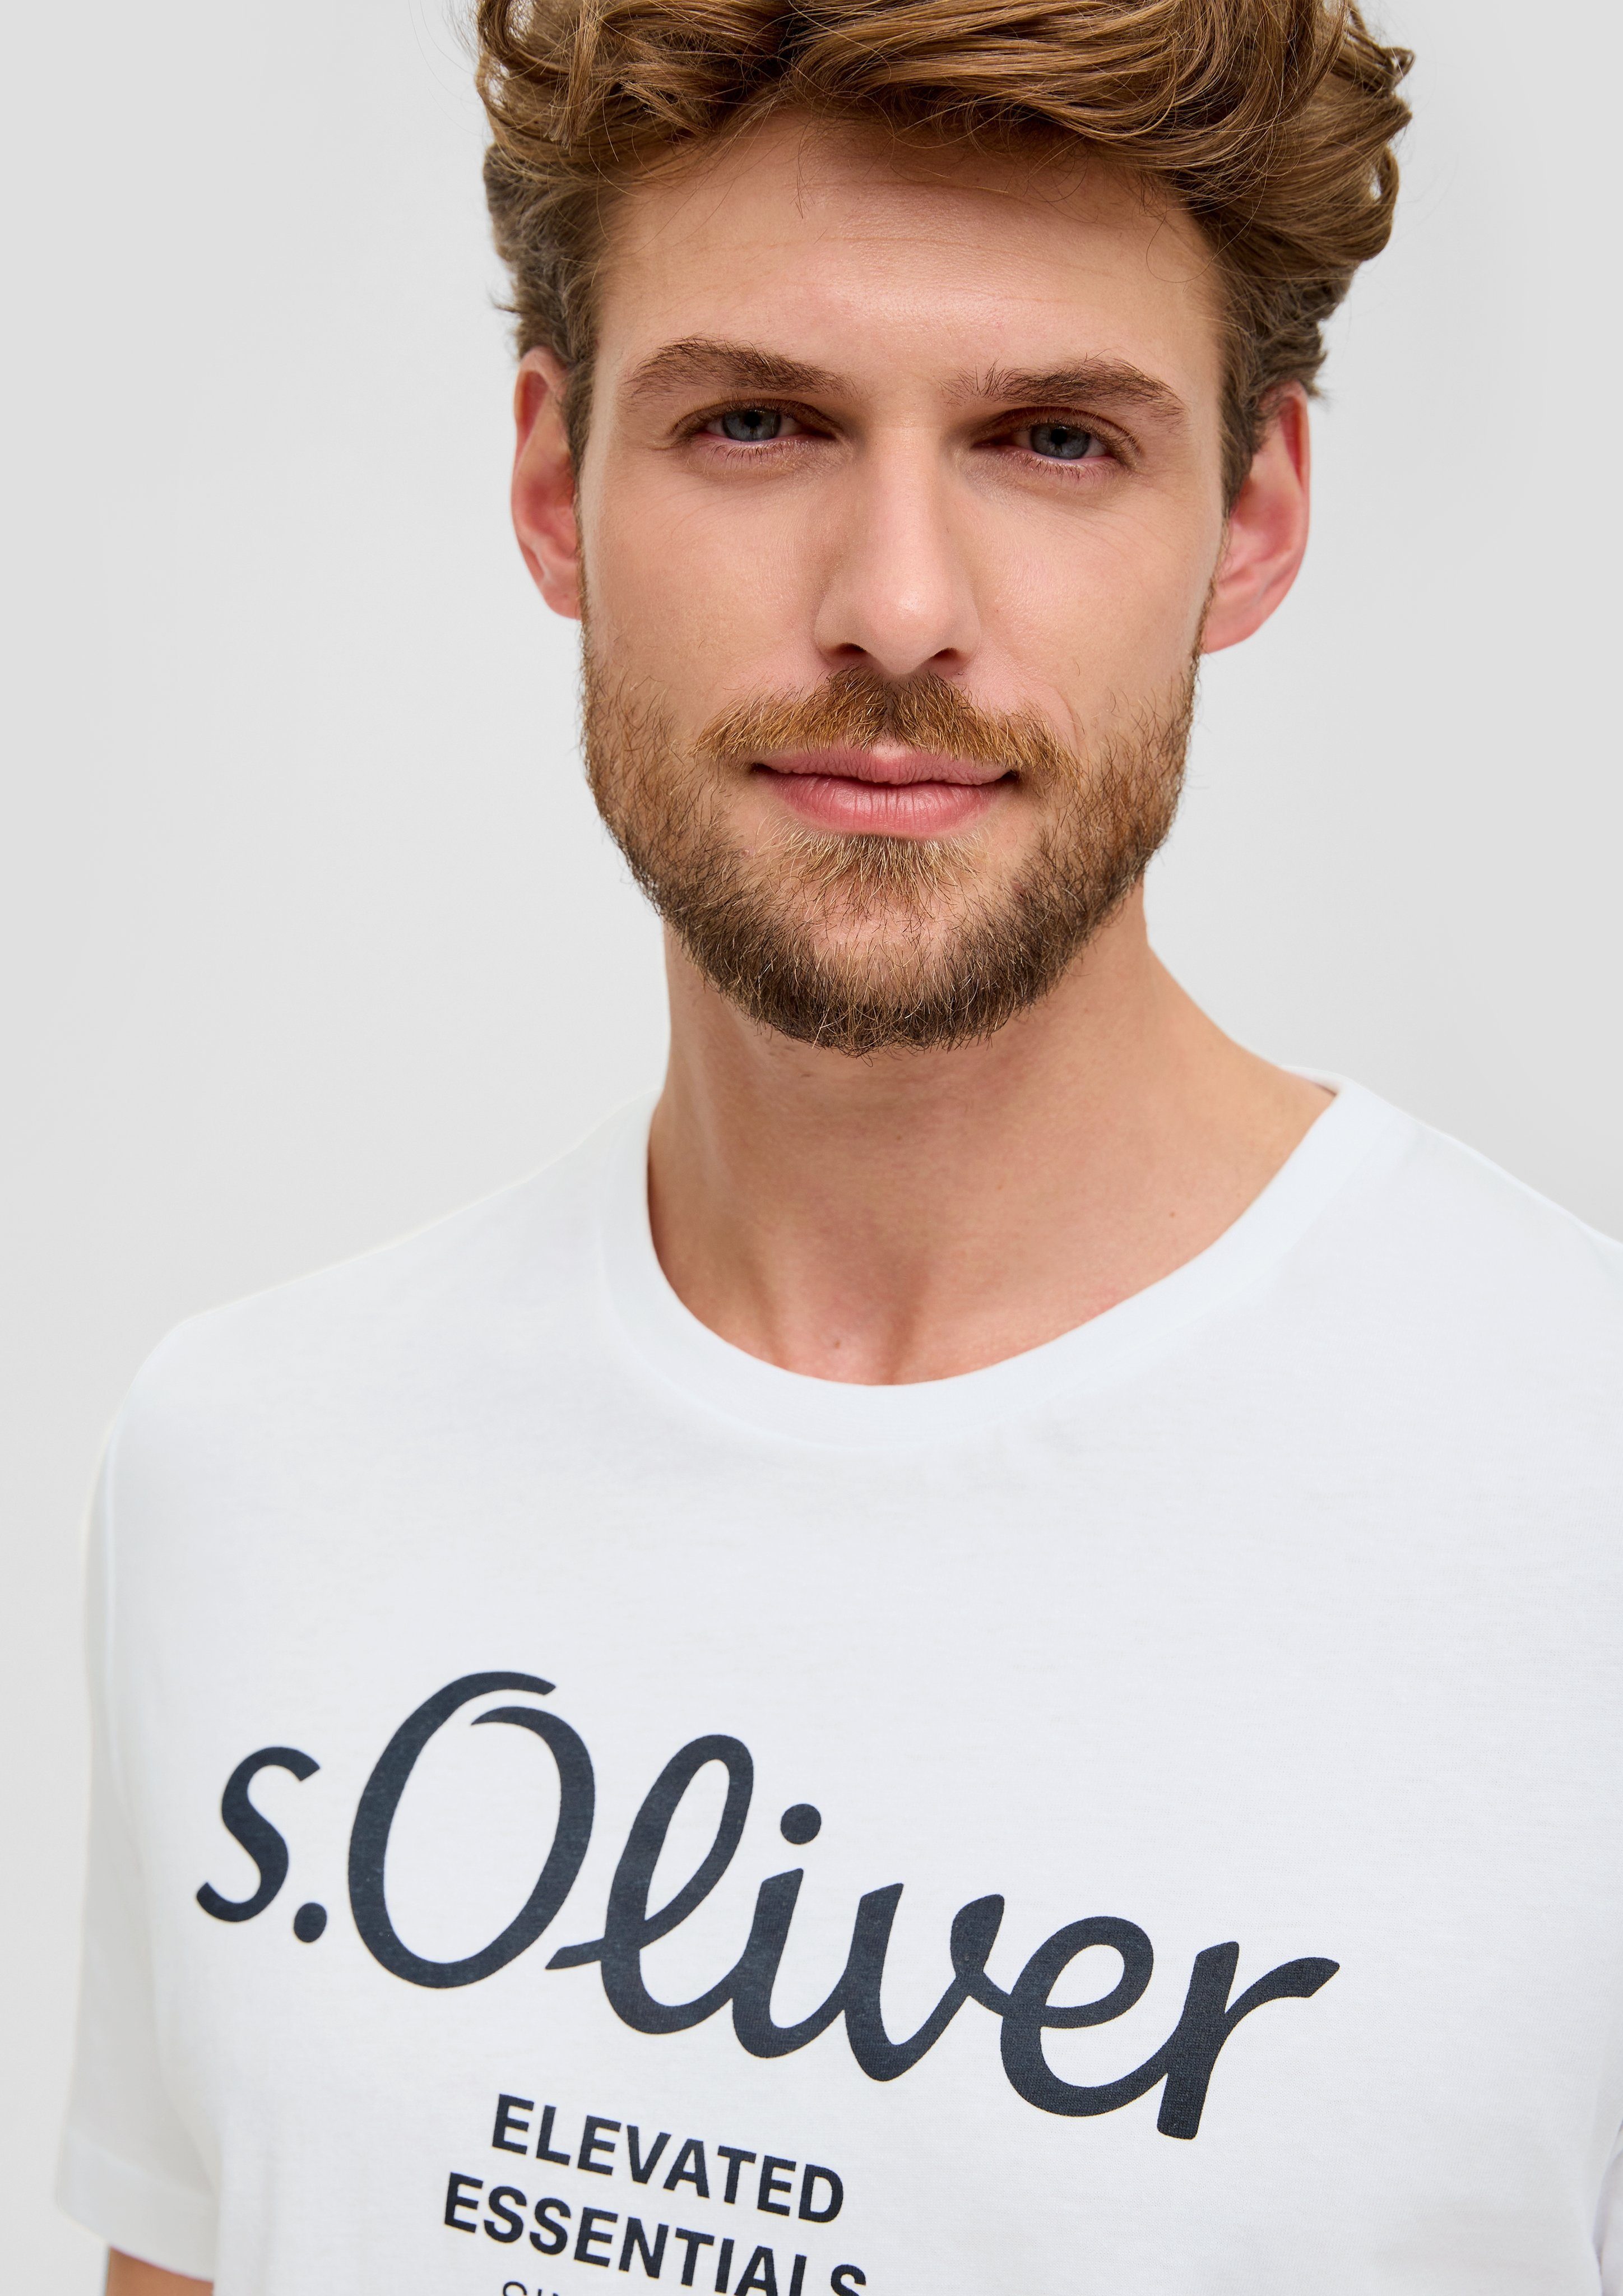 s.Oliver T-Shirt im white sportiven Look